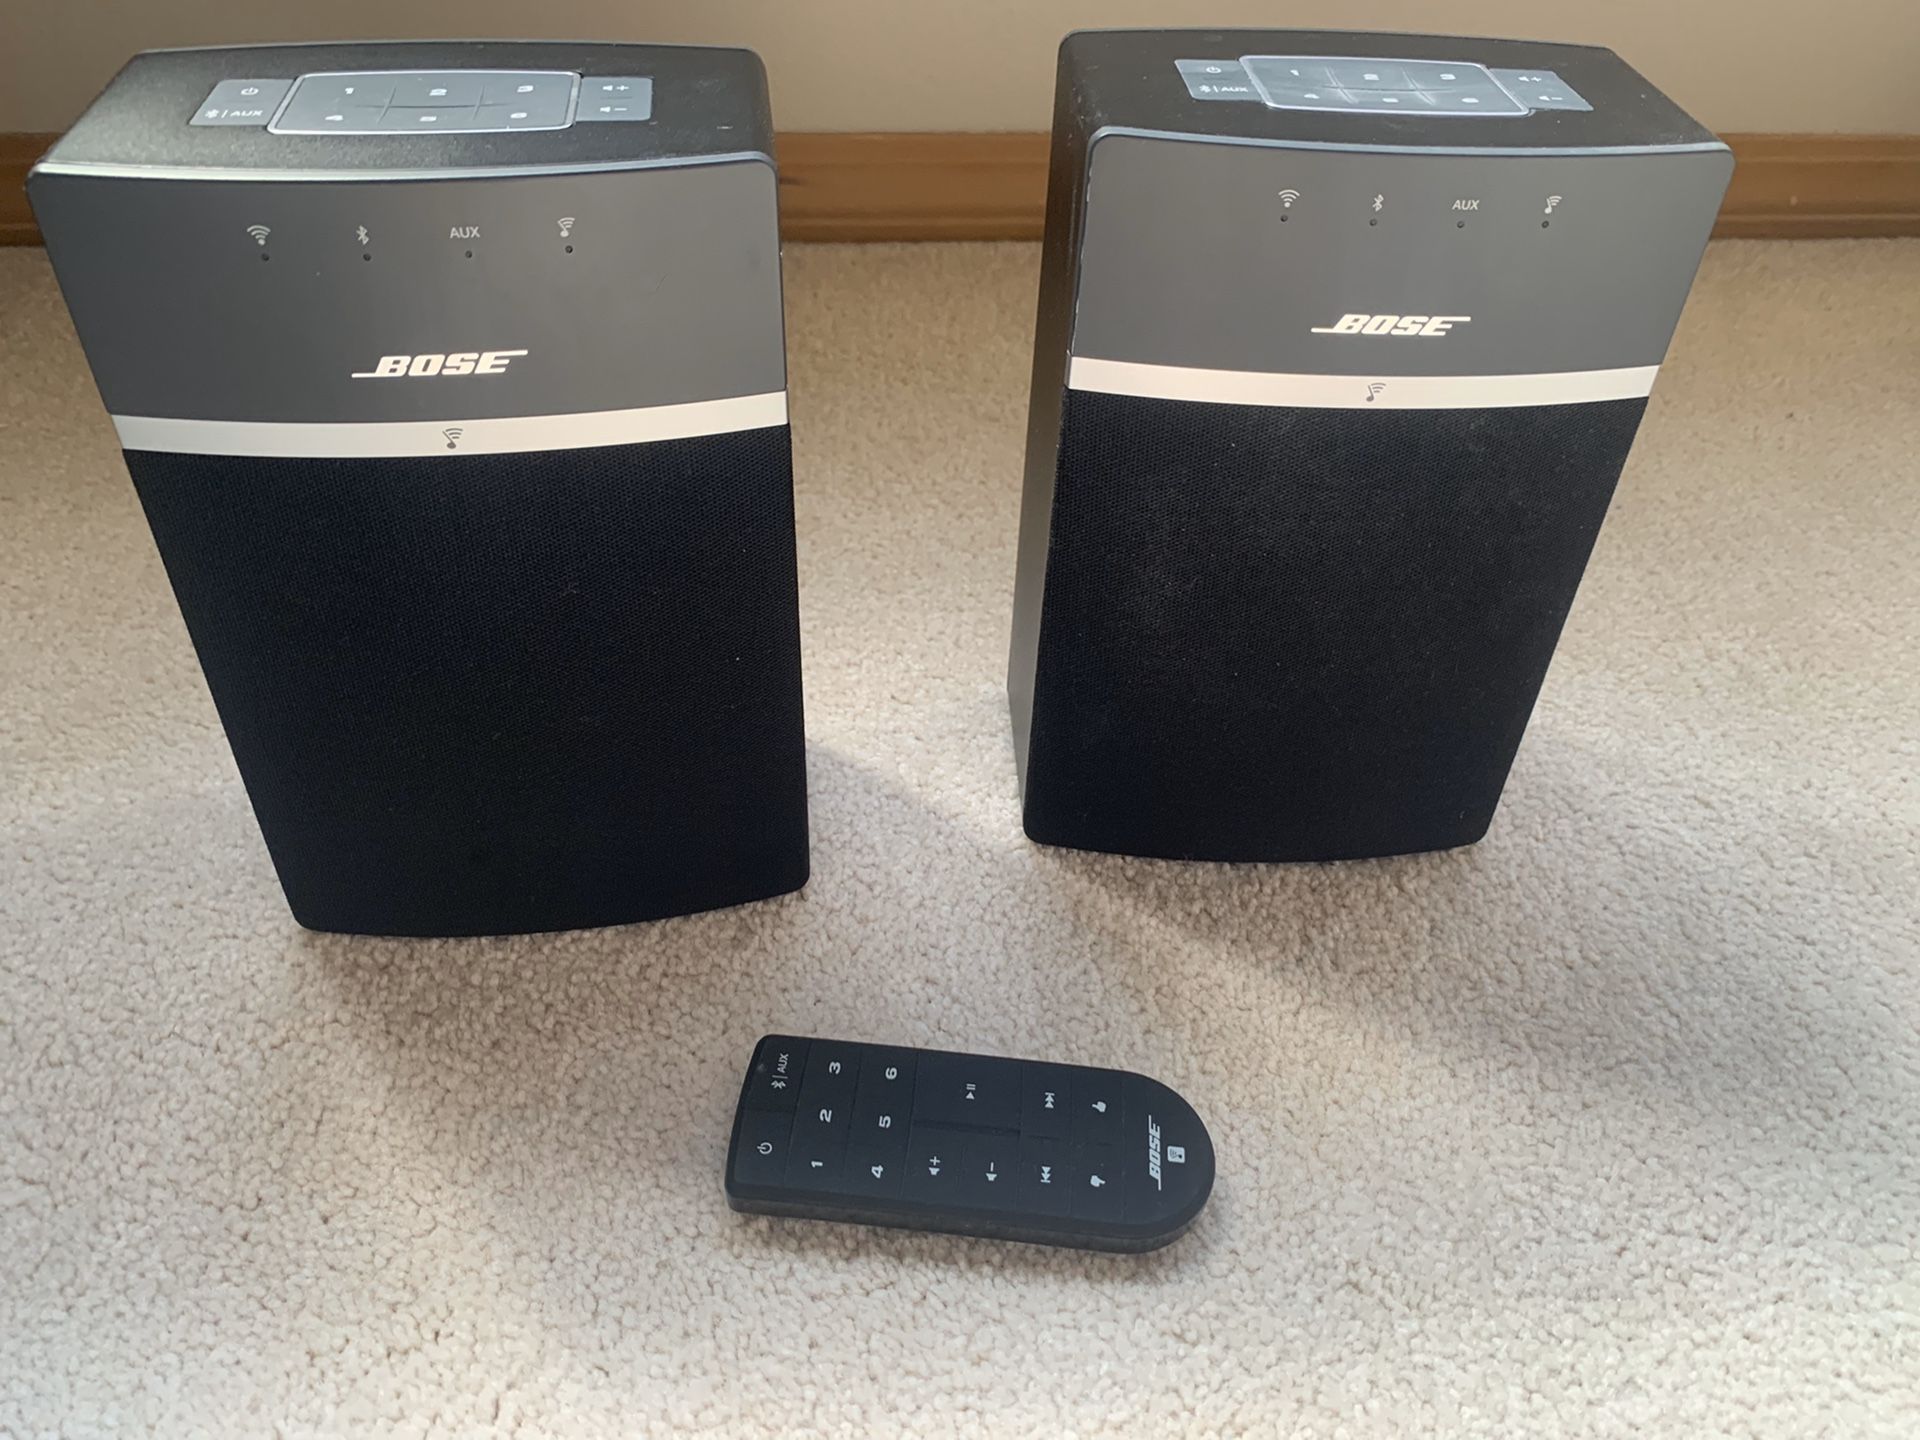 Bose SoundTouch 10 (2 of them)